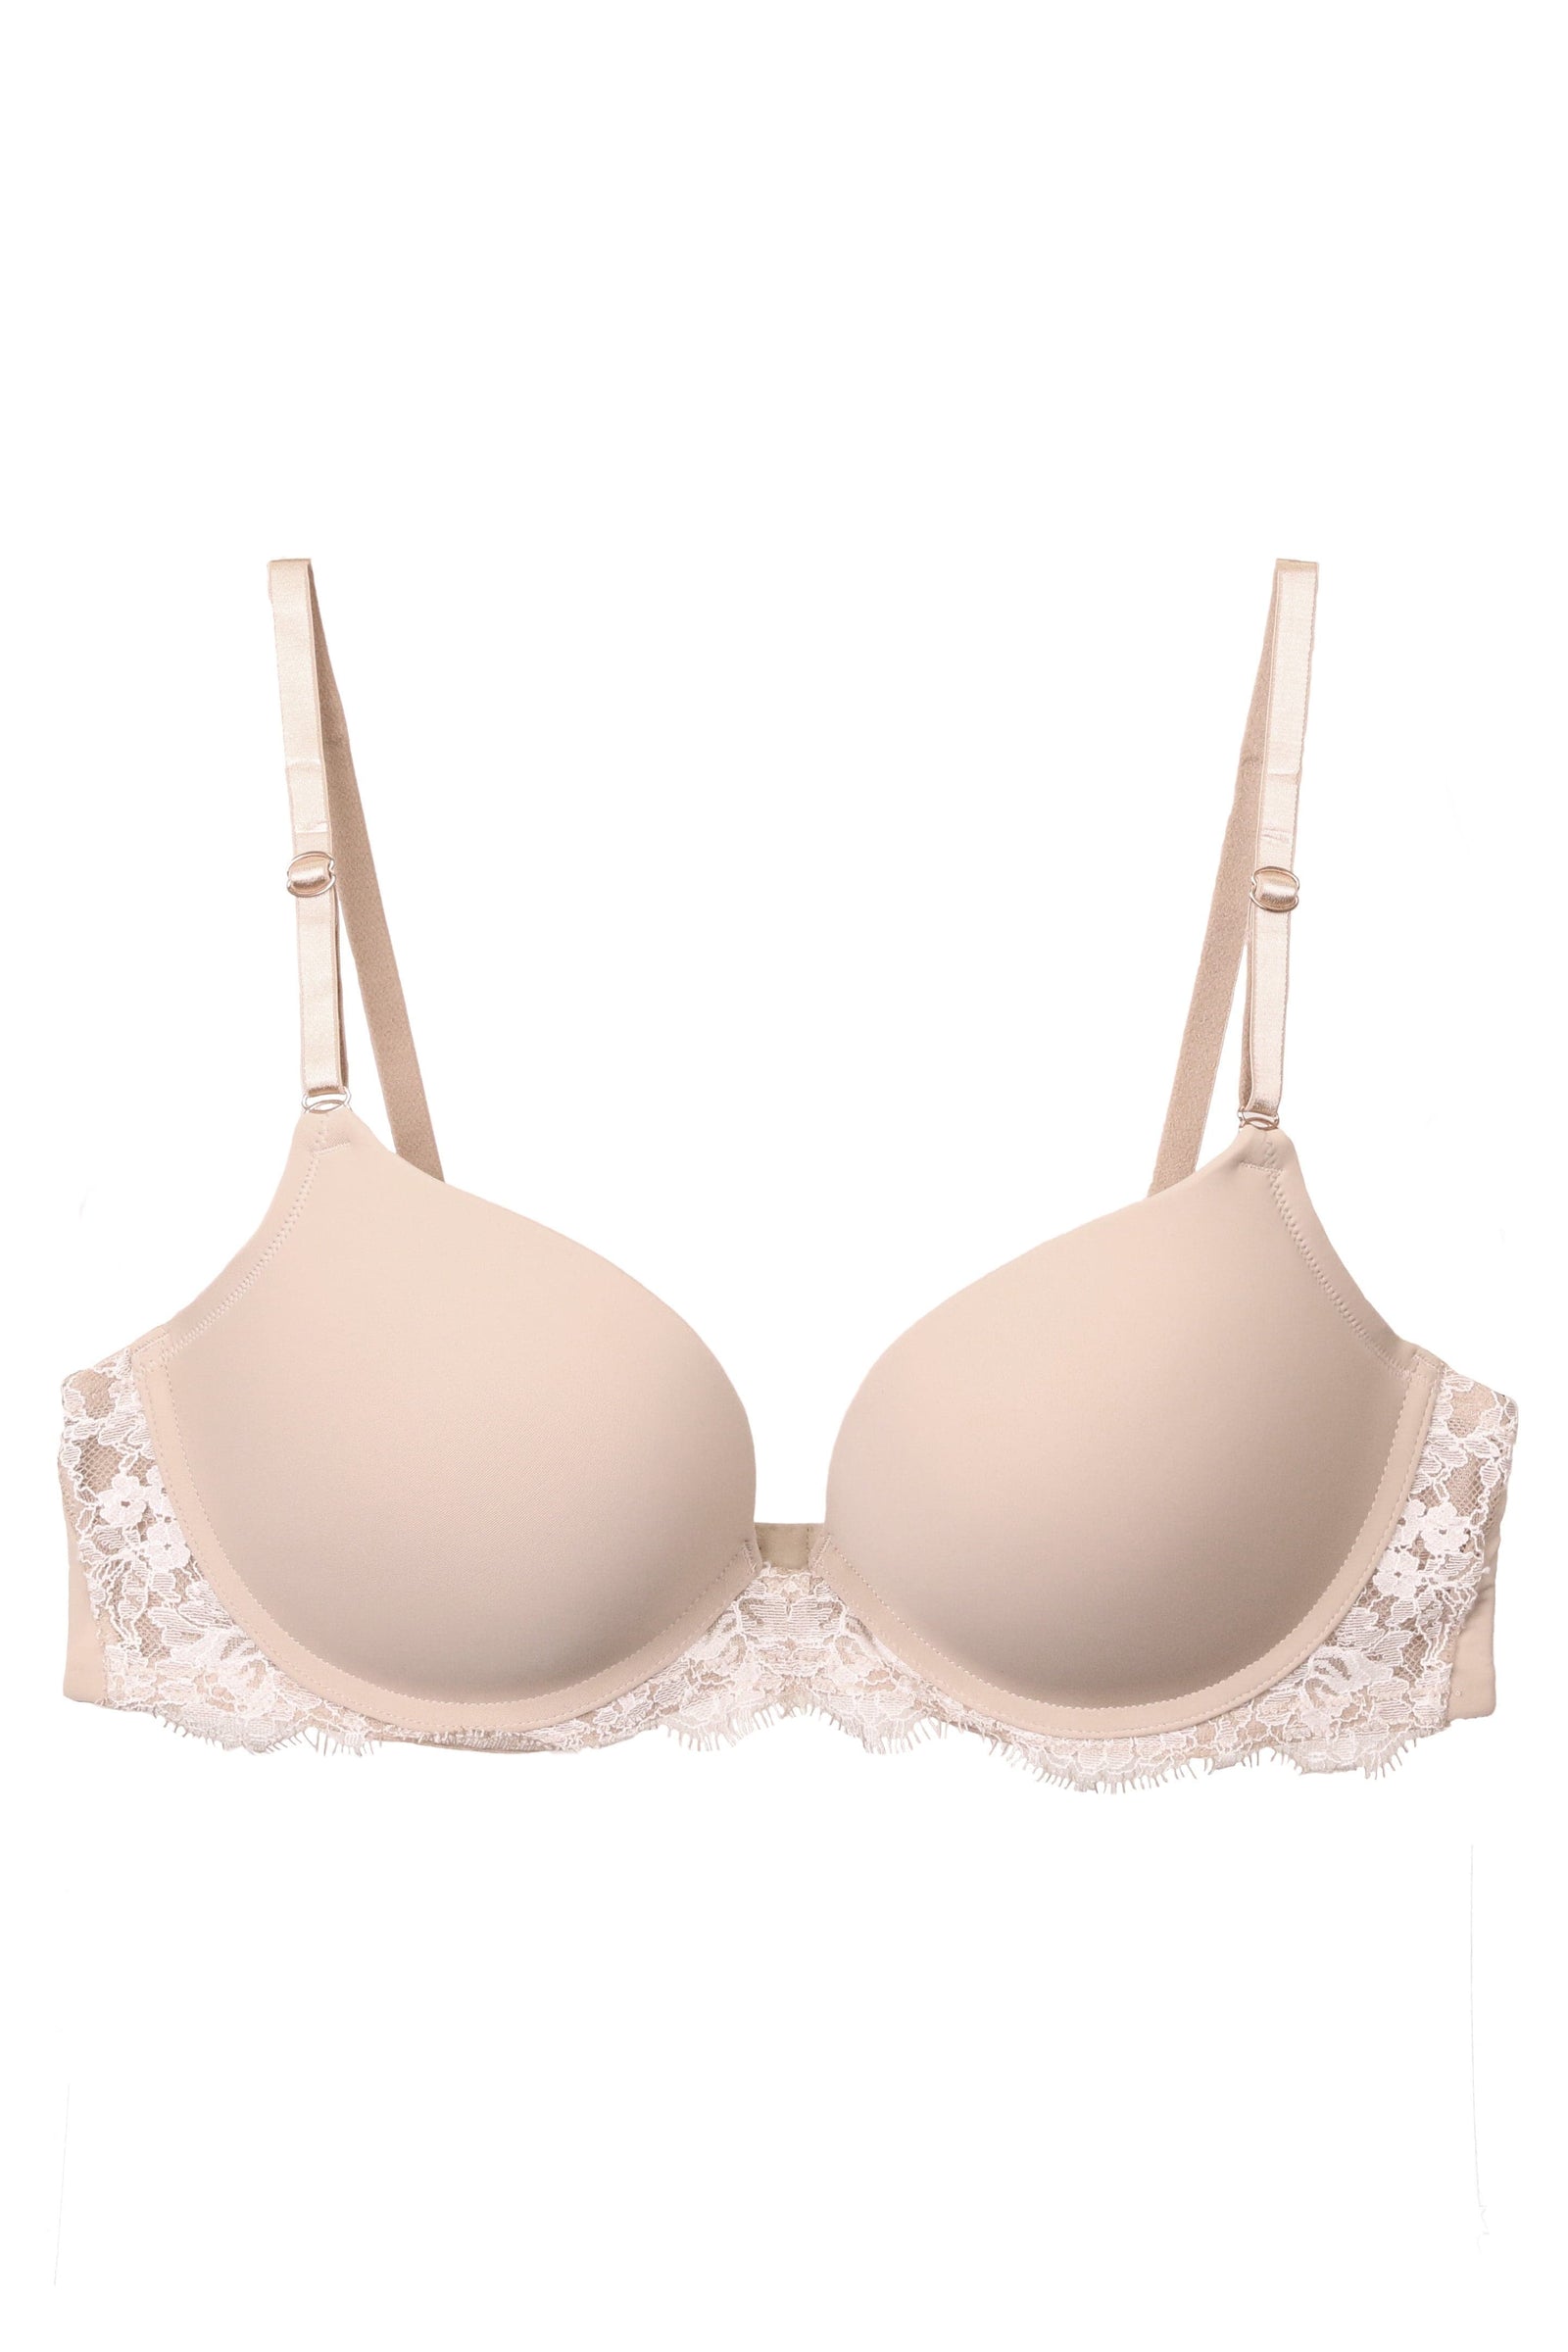 Leonisa Front Cutout Demi-Cup Double Push Up Bra Luxe Lift Beige